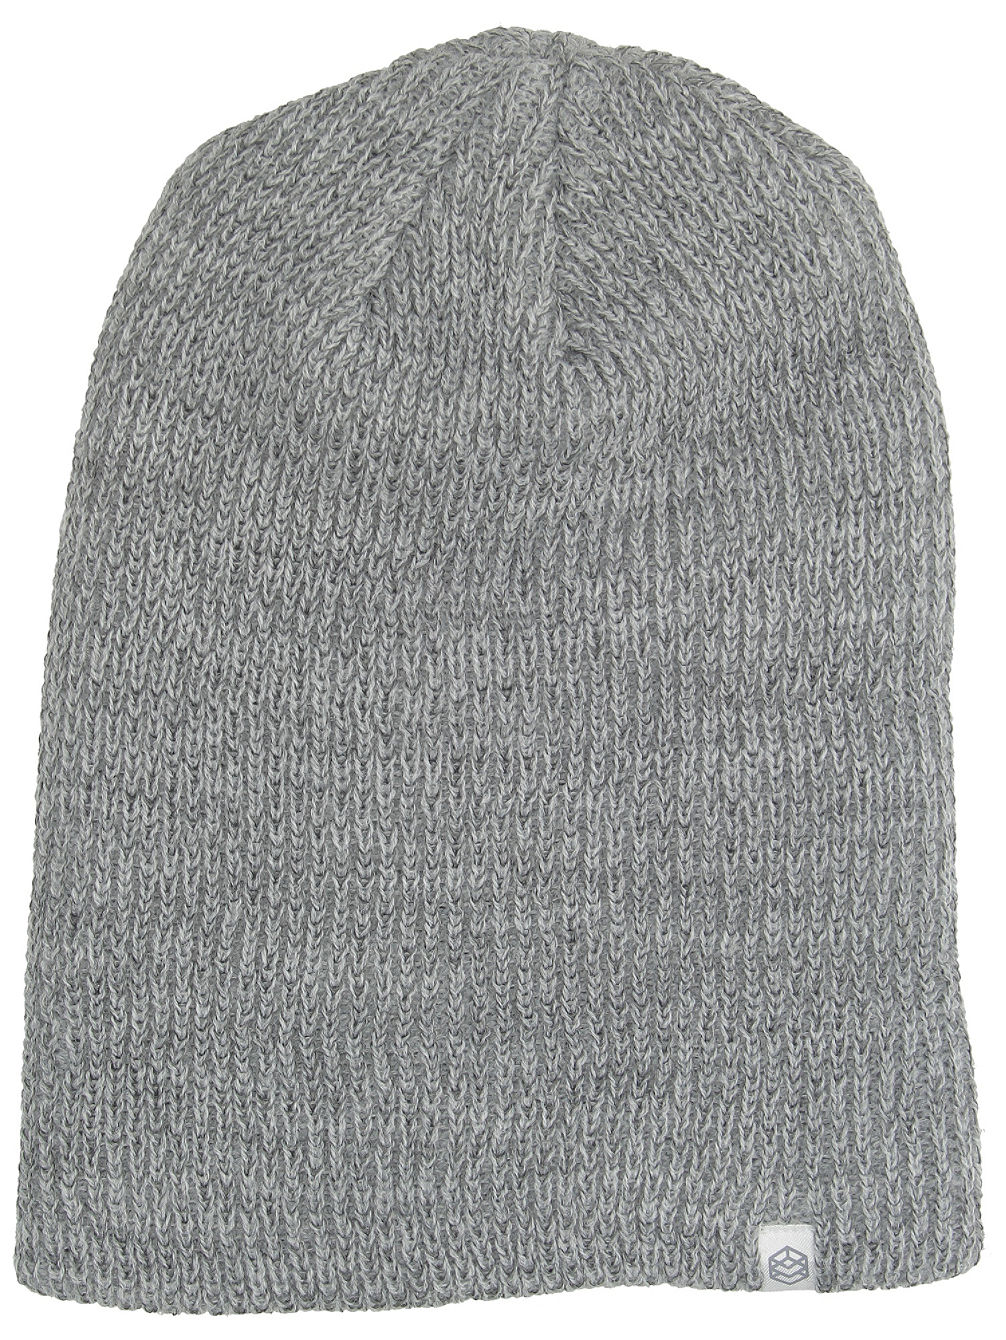 Toque Knit Slouch Gorro